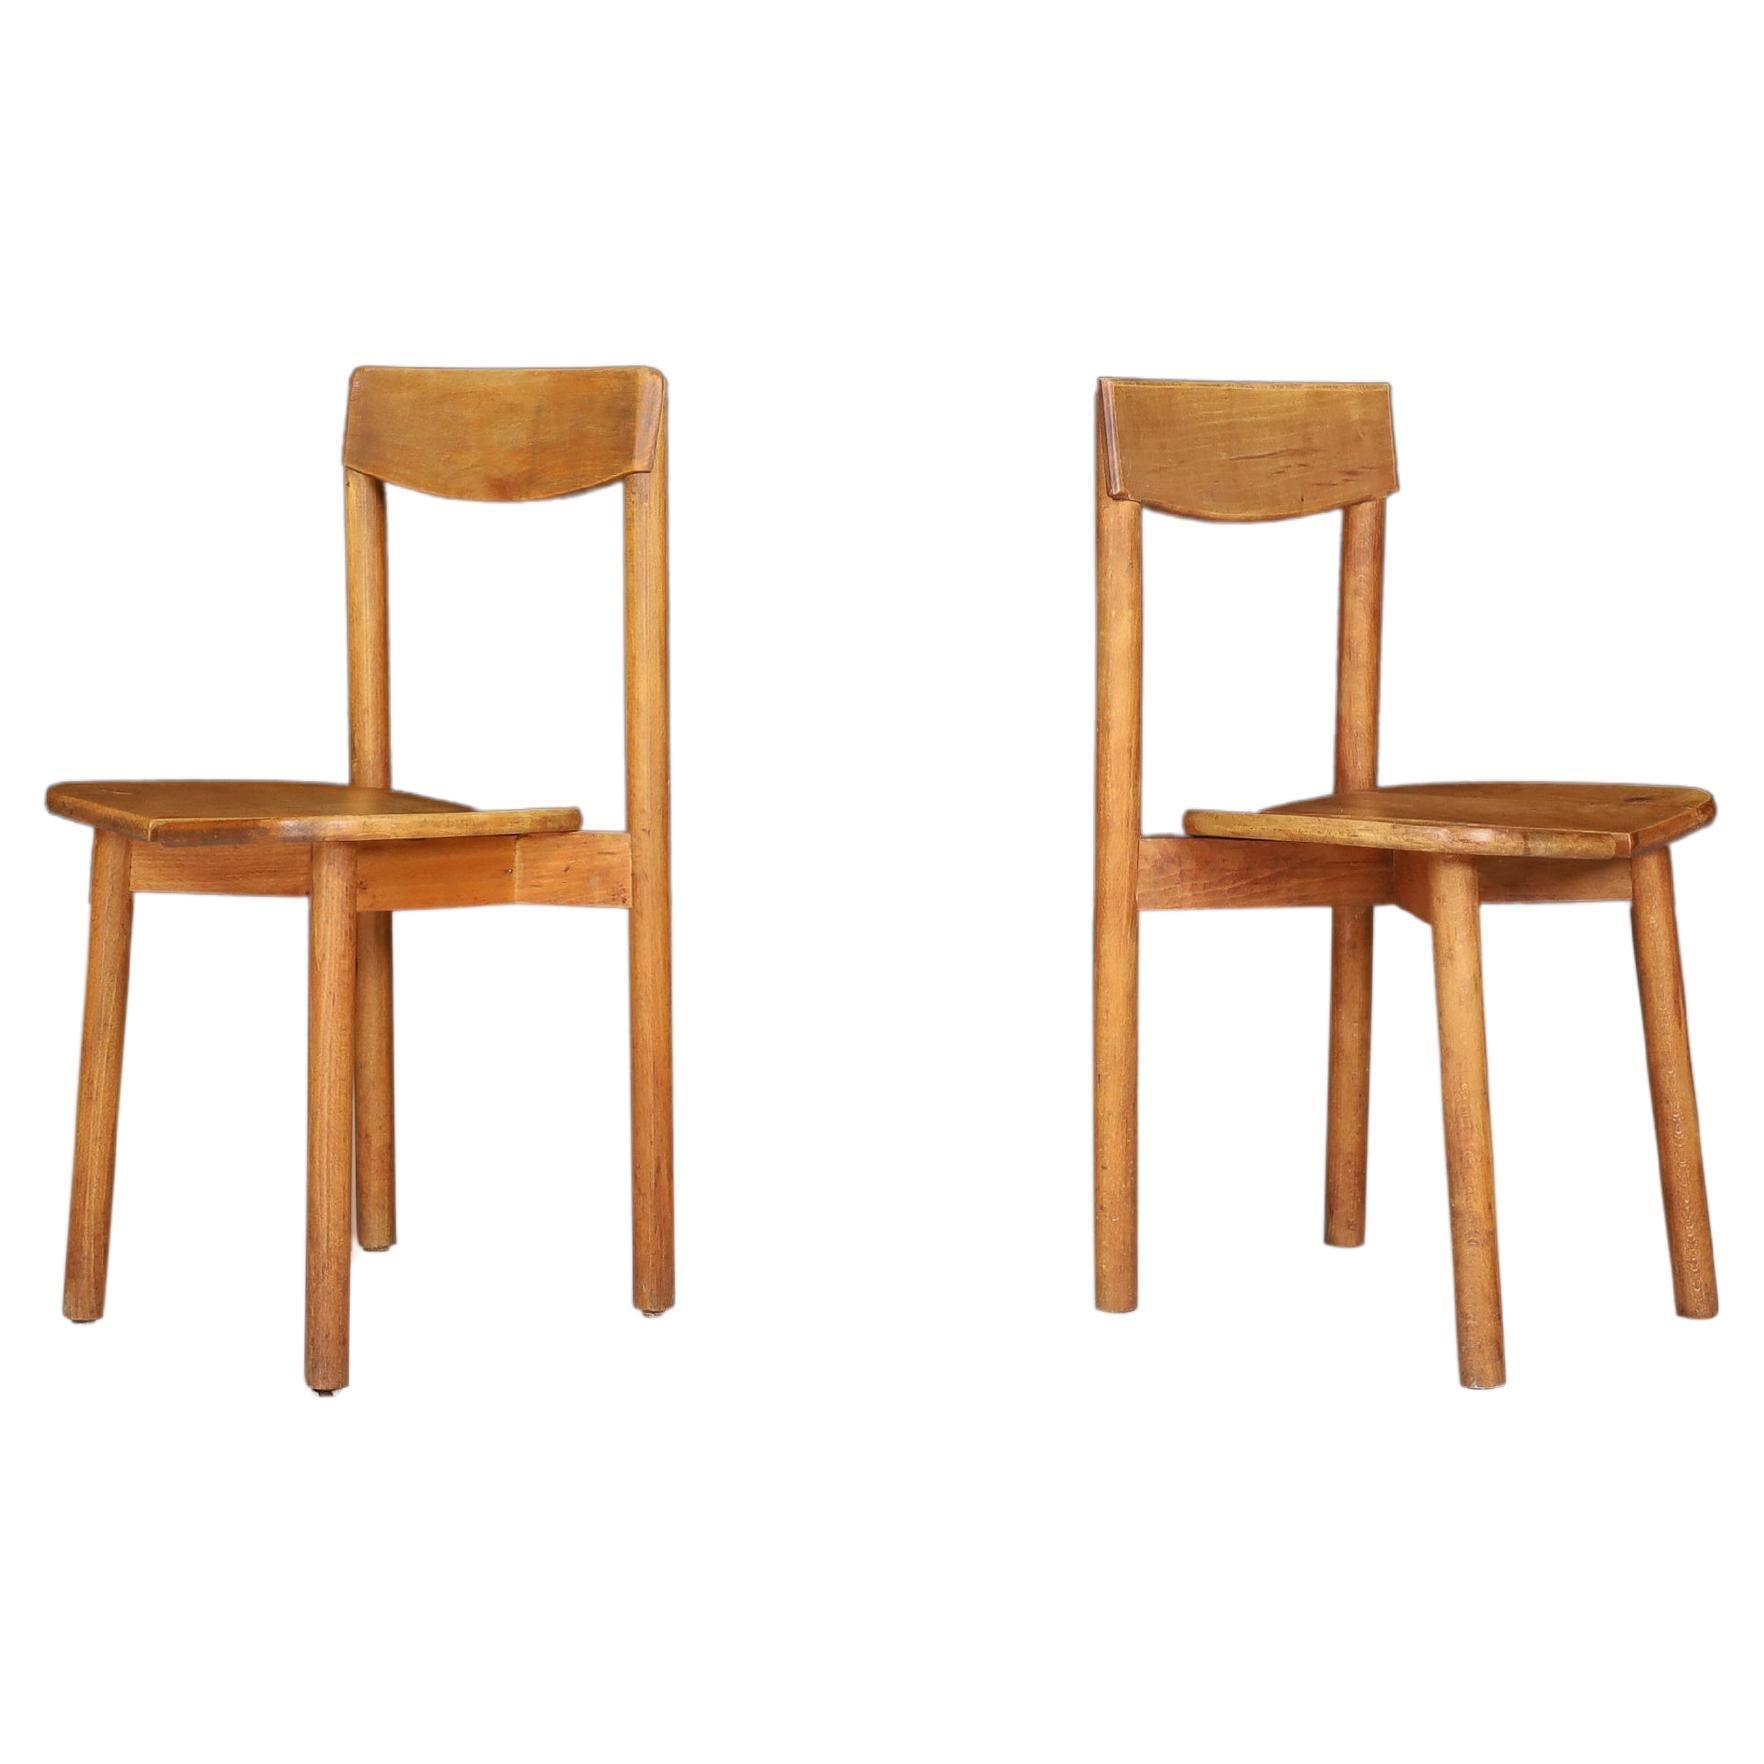 Pierre Gautier Solid Beech Chairs, France, 1960s